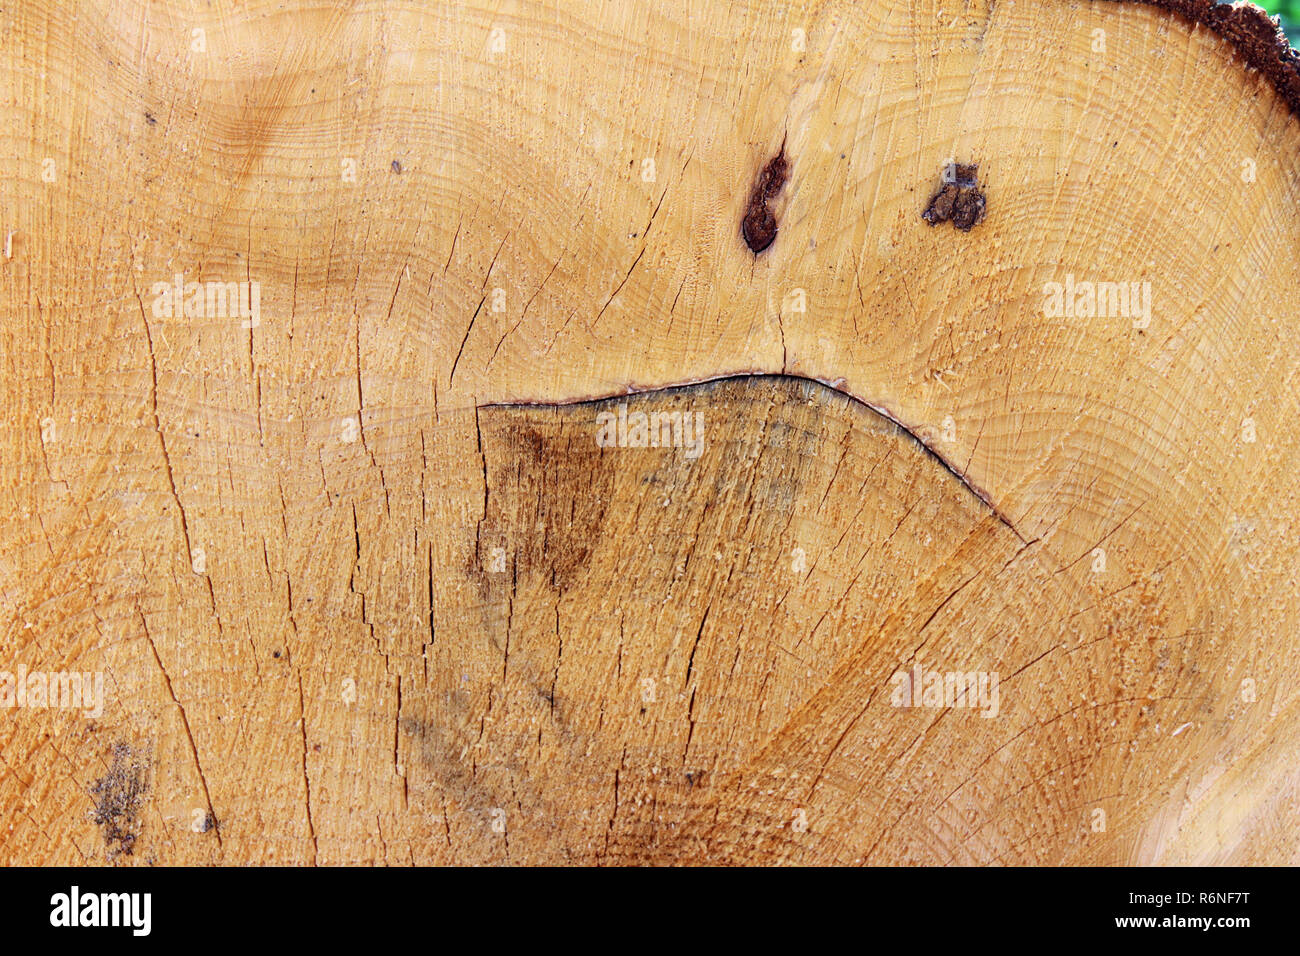 Funny face - grimace on the cut tree trunk - abstract detail of wood texture Stock Photo